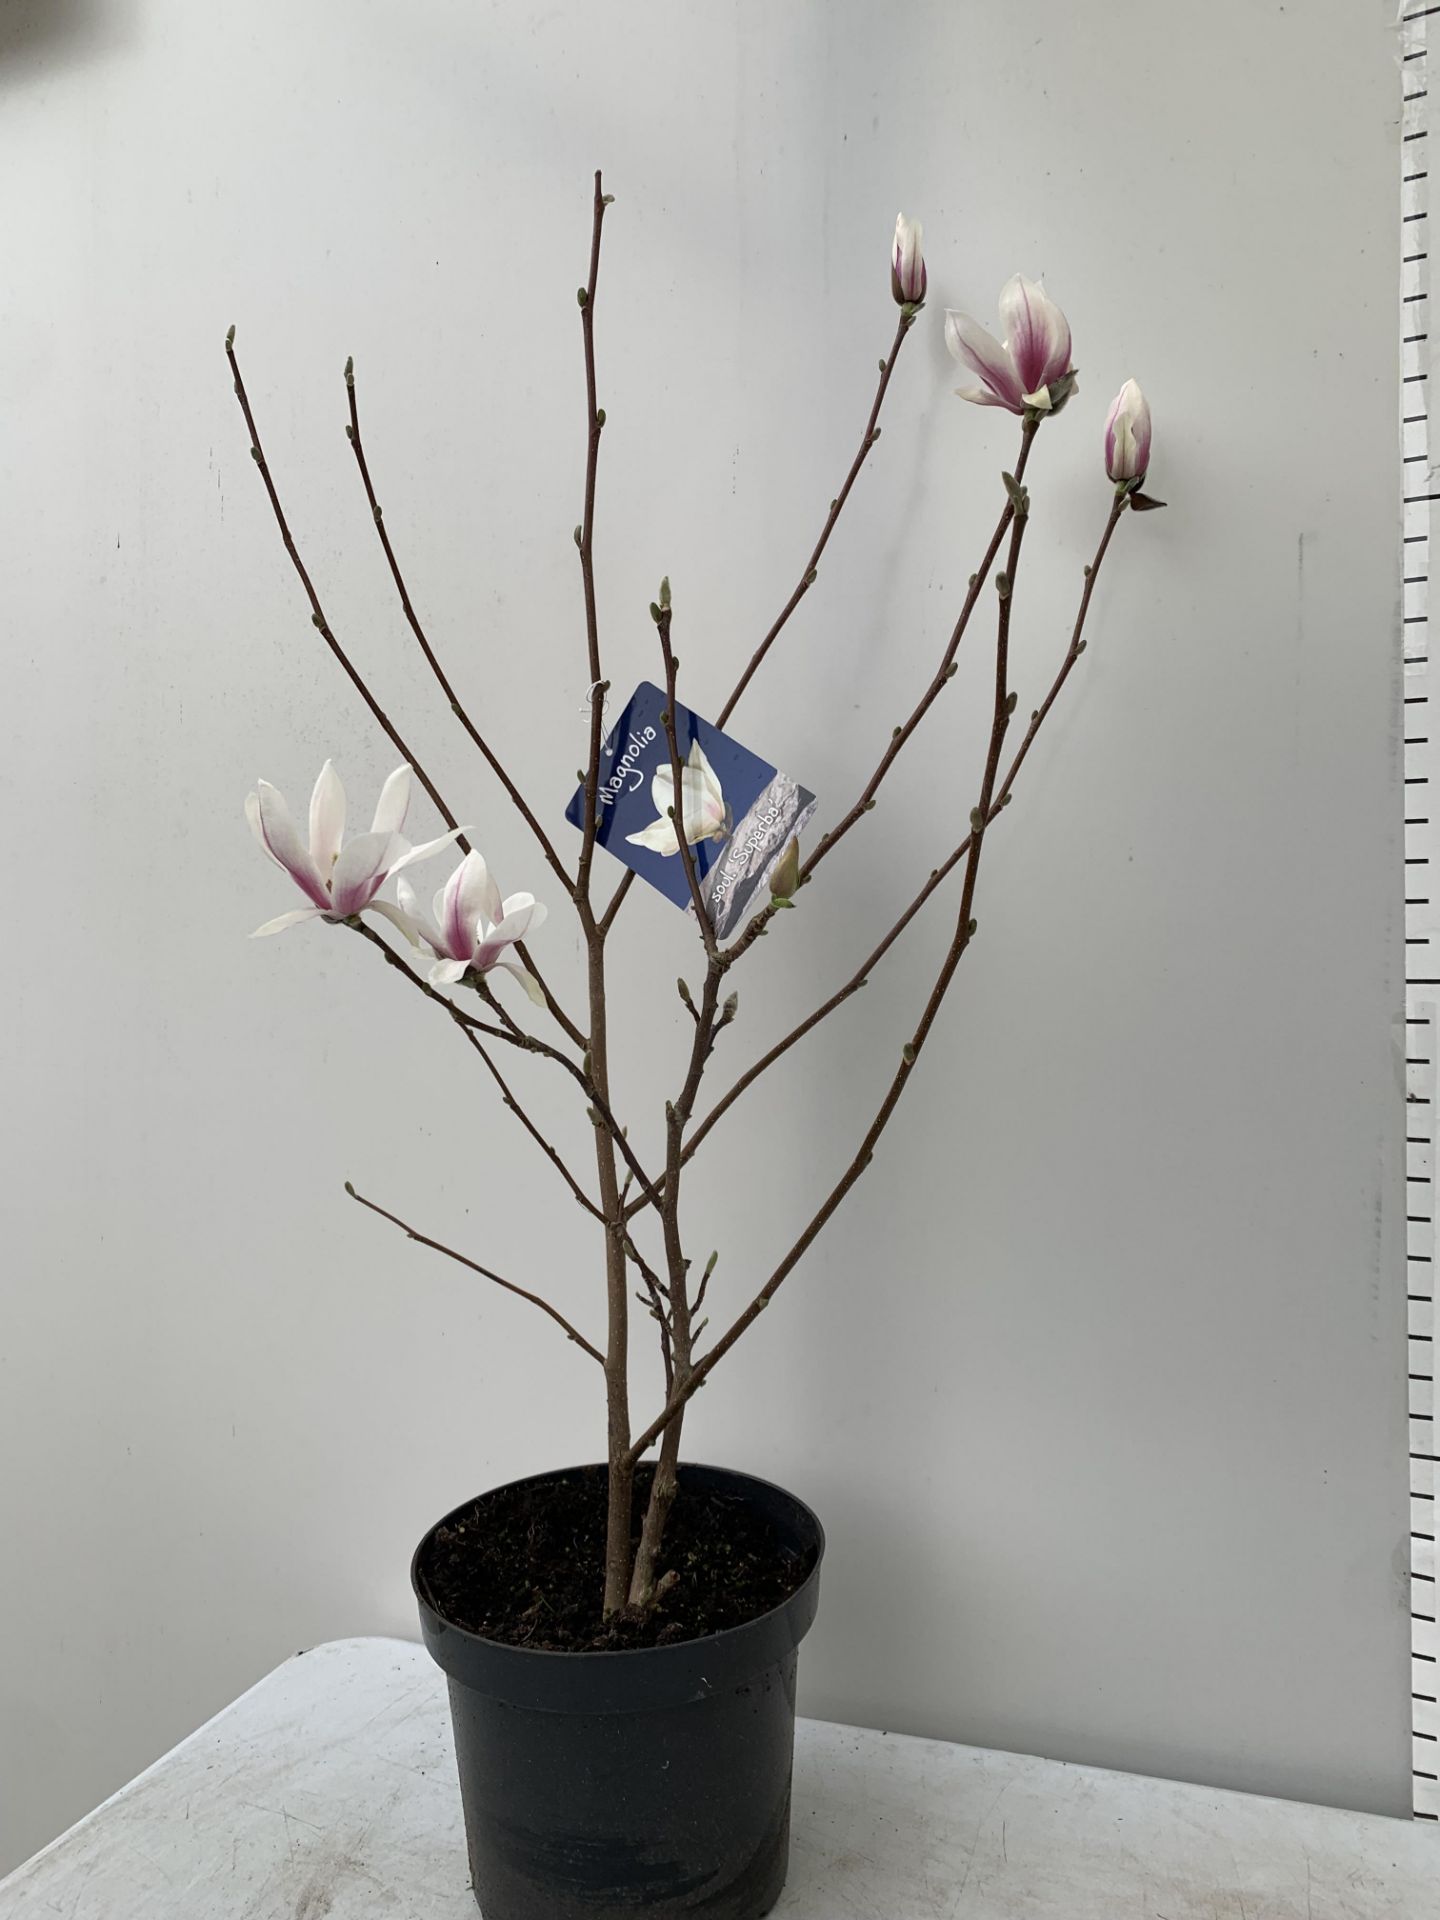 ONE MAGNOLIA SOULANGEANA 'SUPERBA' APPROX 120CM IN HEIGHT IN A 7 LTR POT PLUS VAT - Image 3 of 14